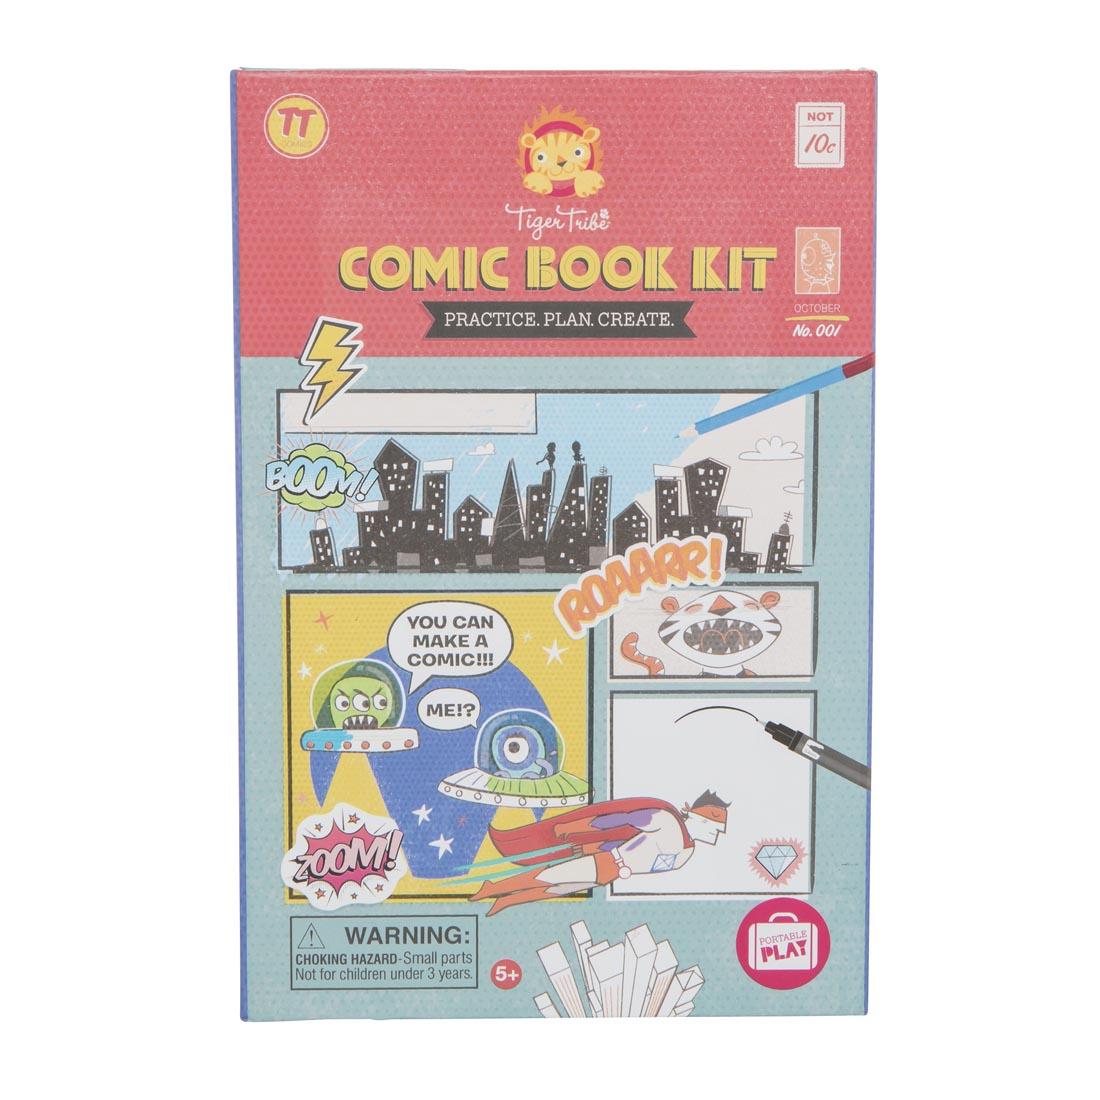 Cover of the Comic Book Kit